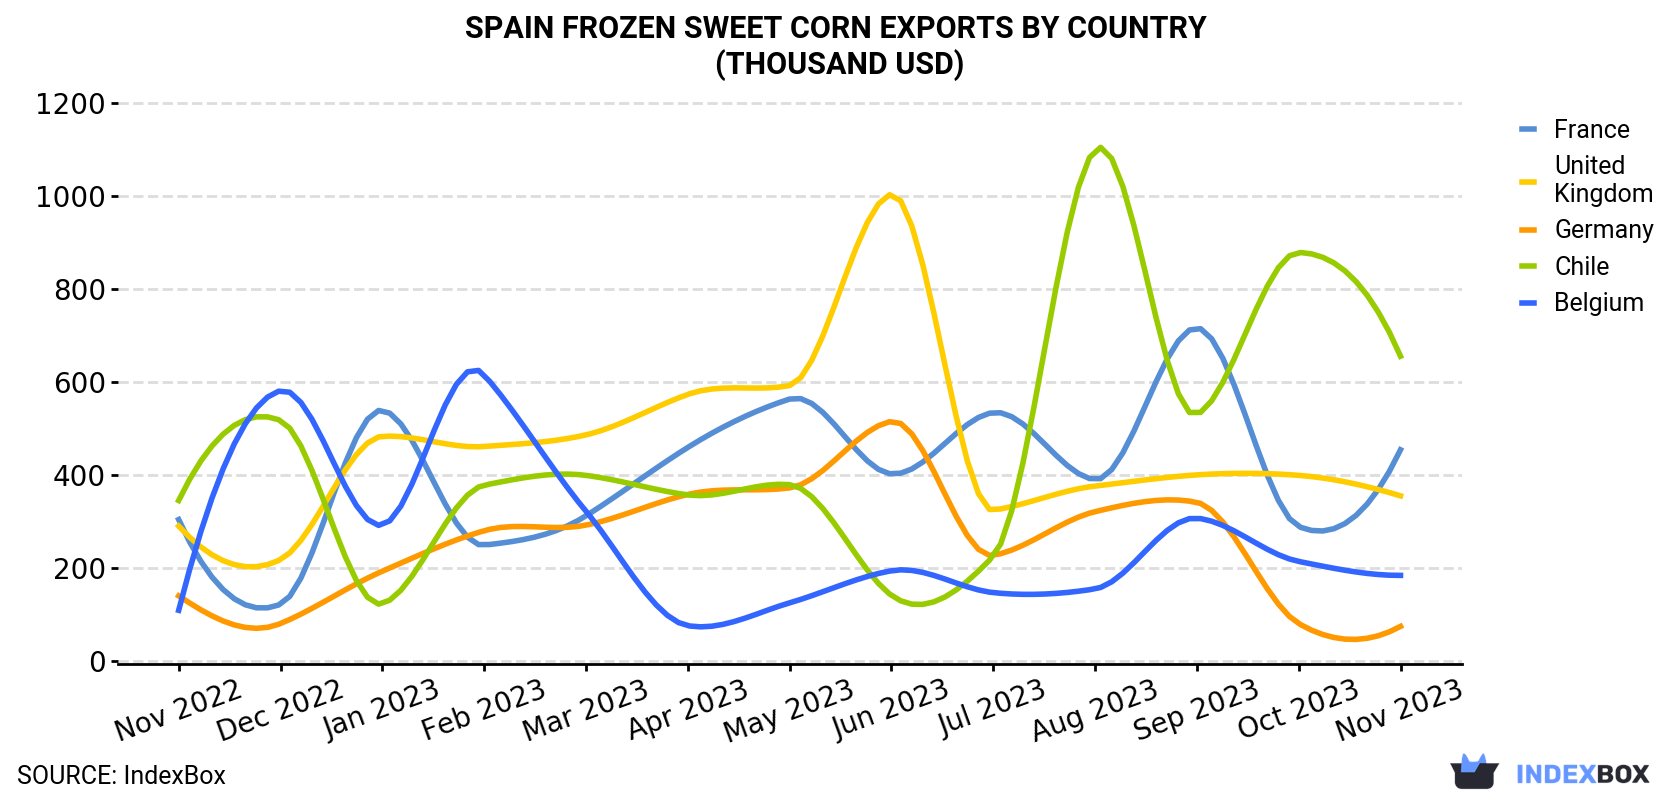 Spain Frozen Sweet Corn Exports By Country (Thousand USD)